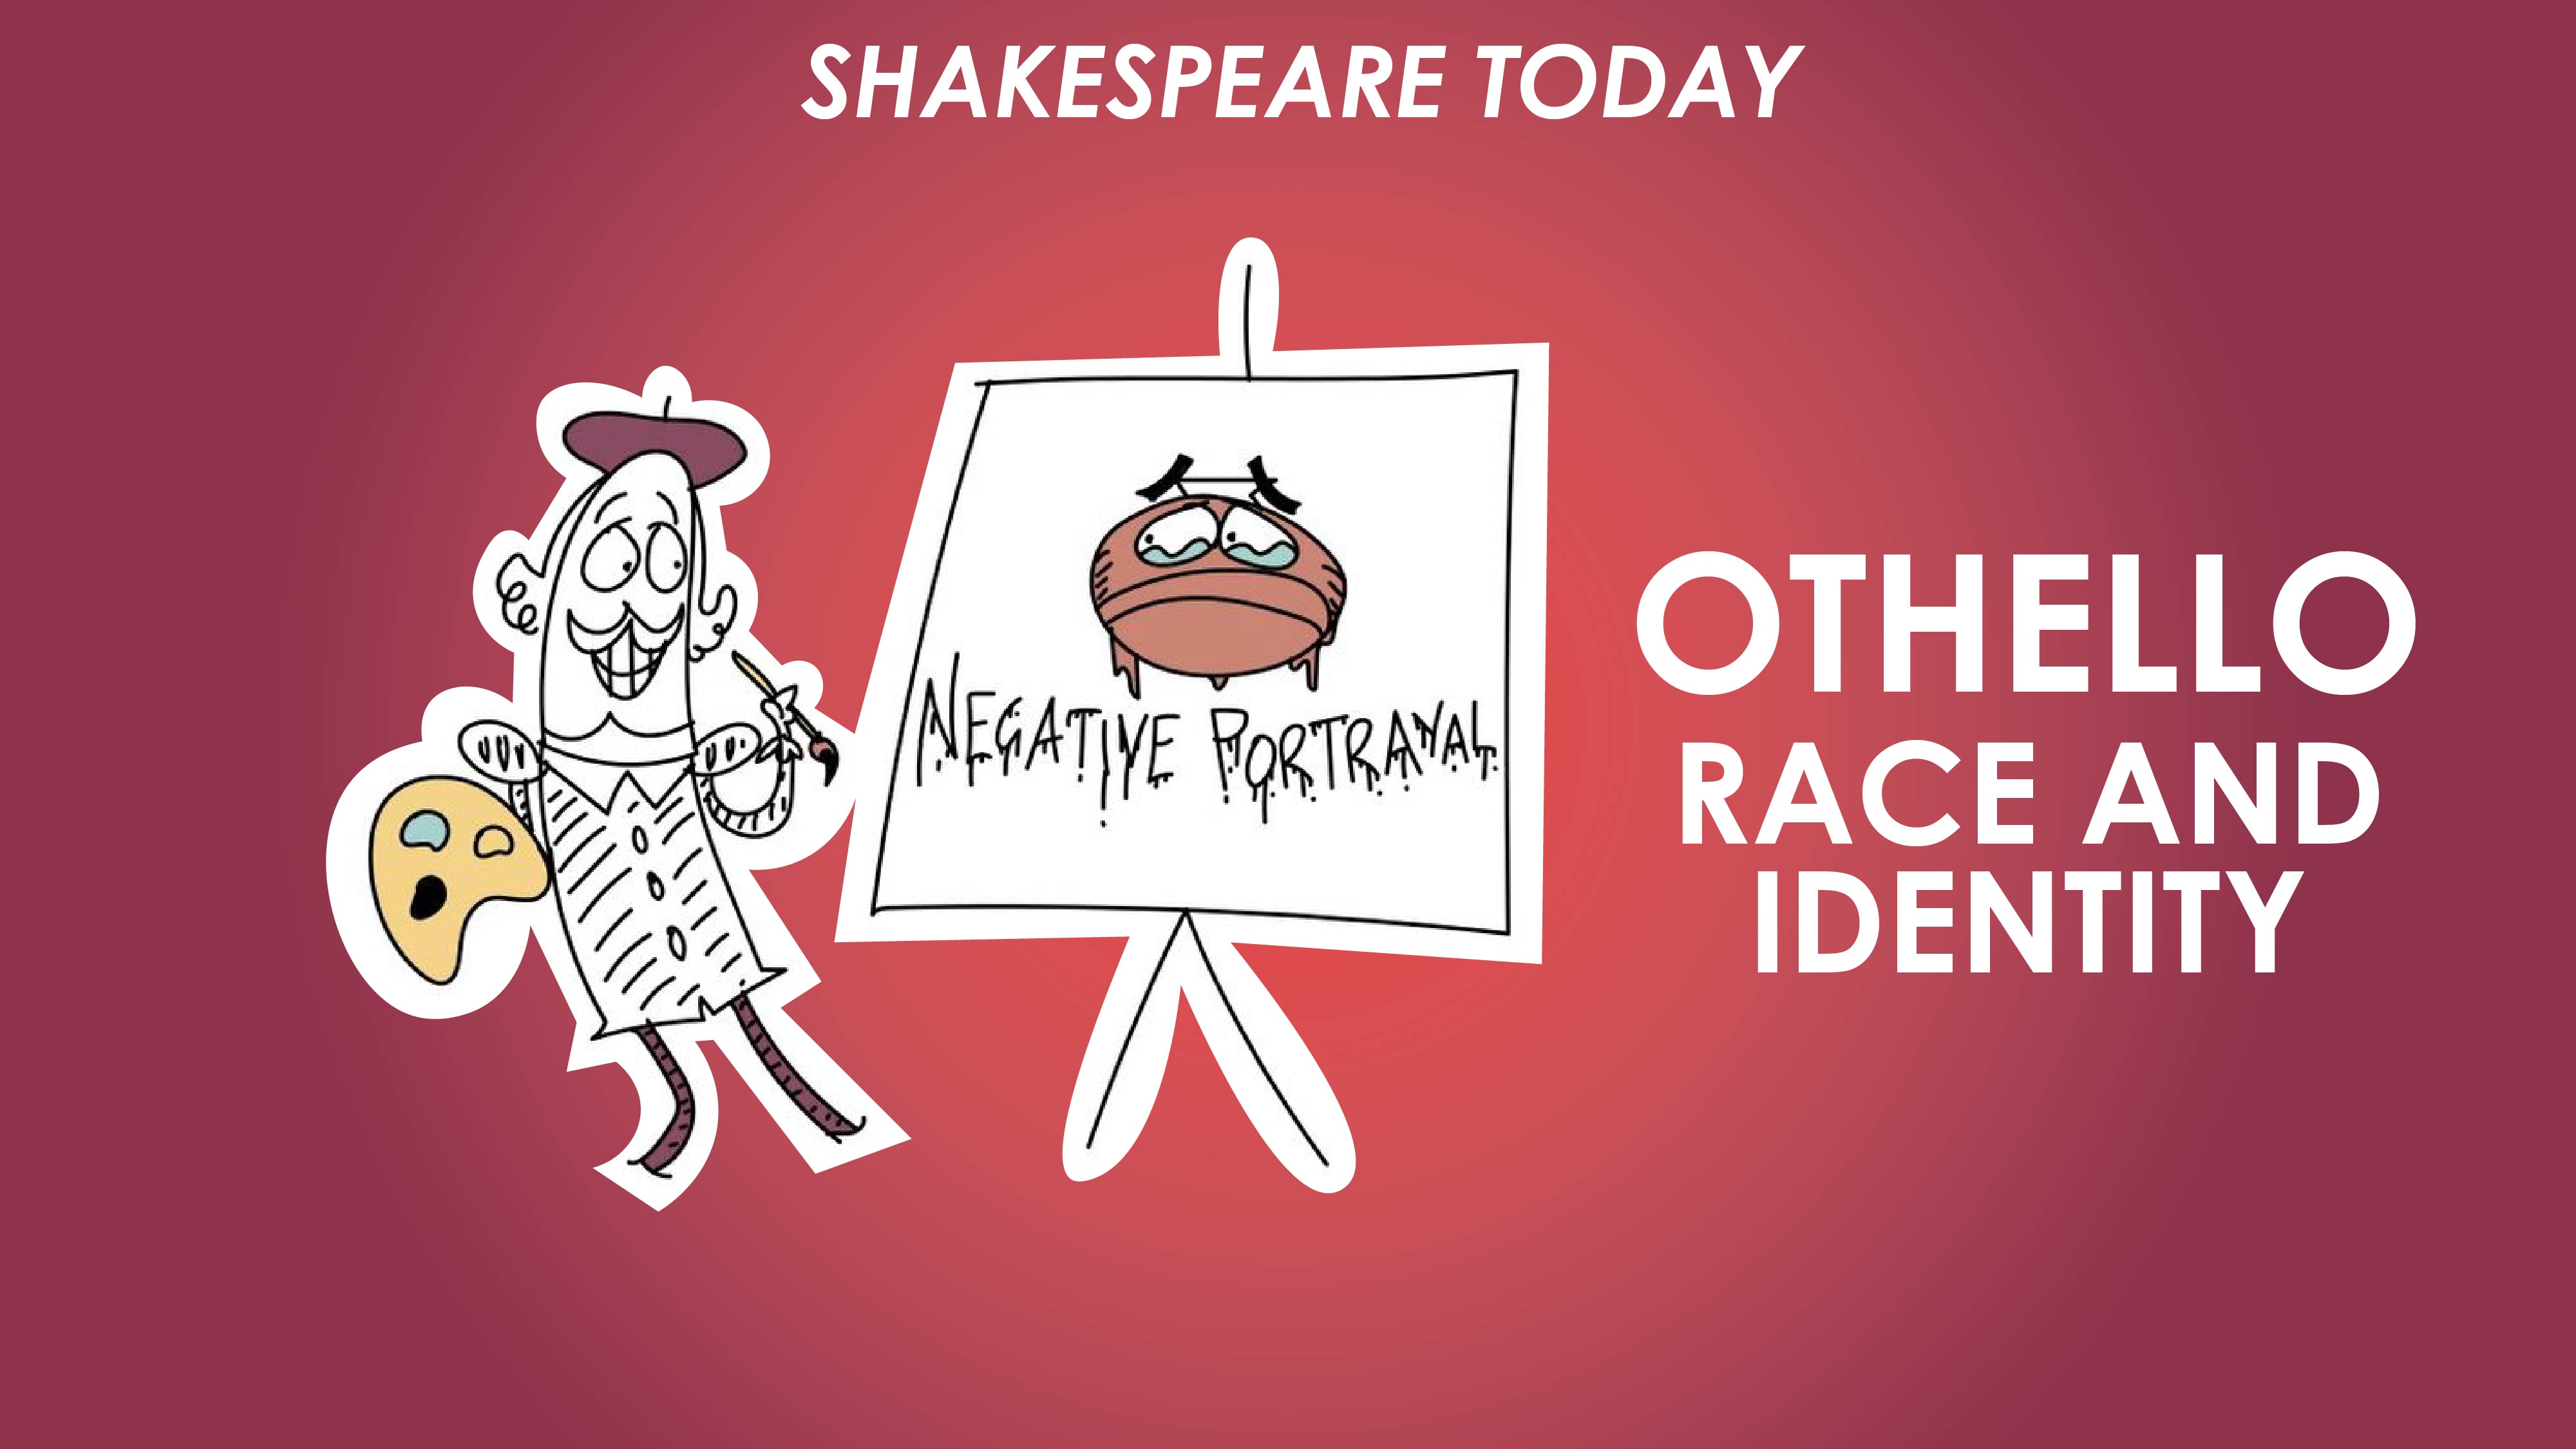 Othello Theme of Race and Identity - Shakespeare Today Series